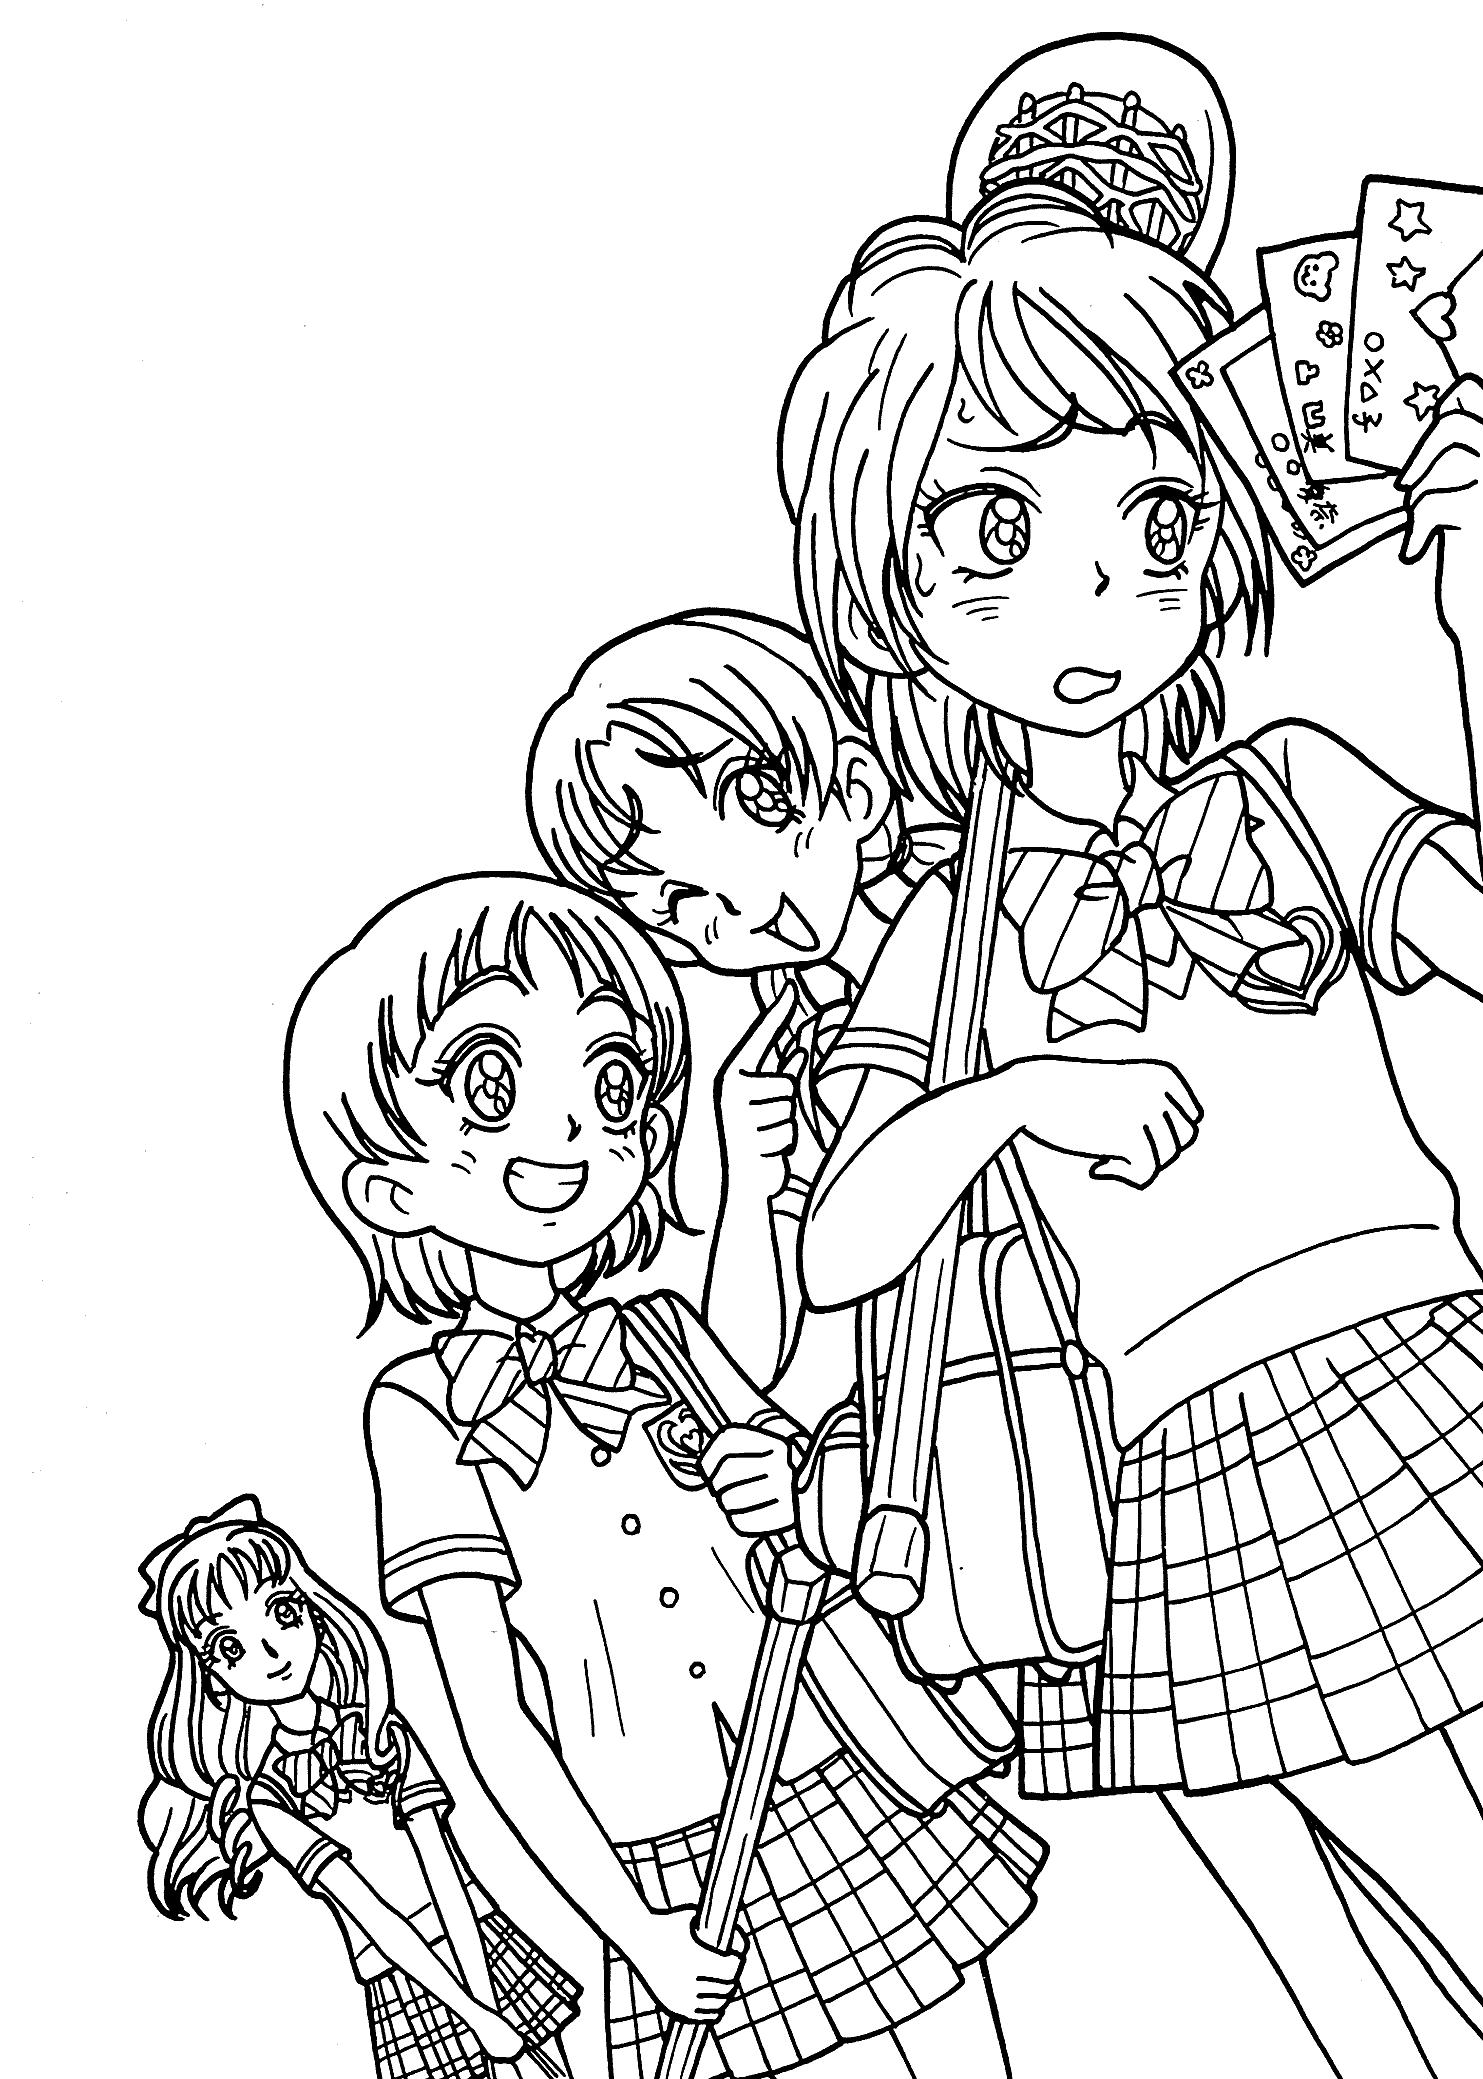 Anime Friends Girls Coloring Pages - Coloring Pages For All Ages